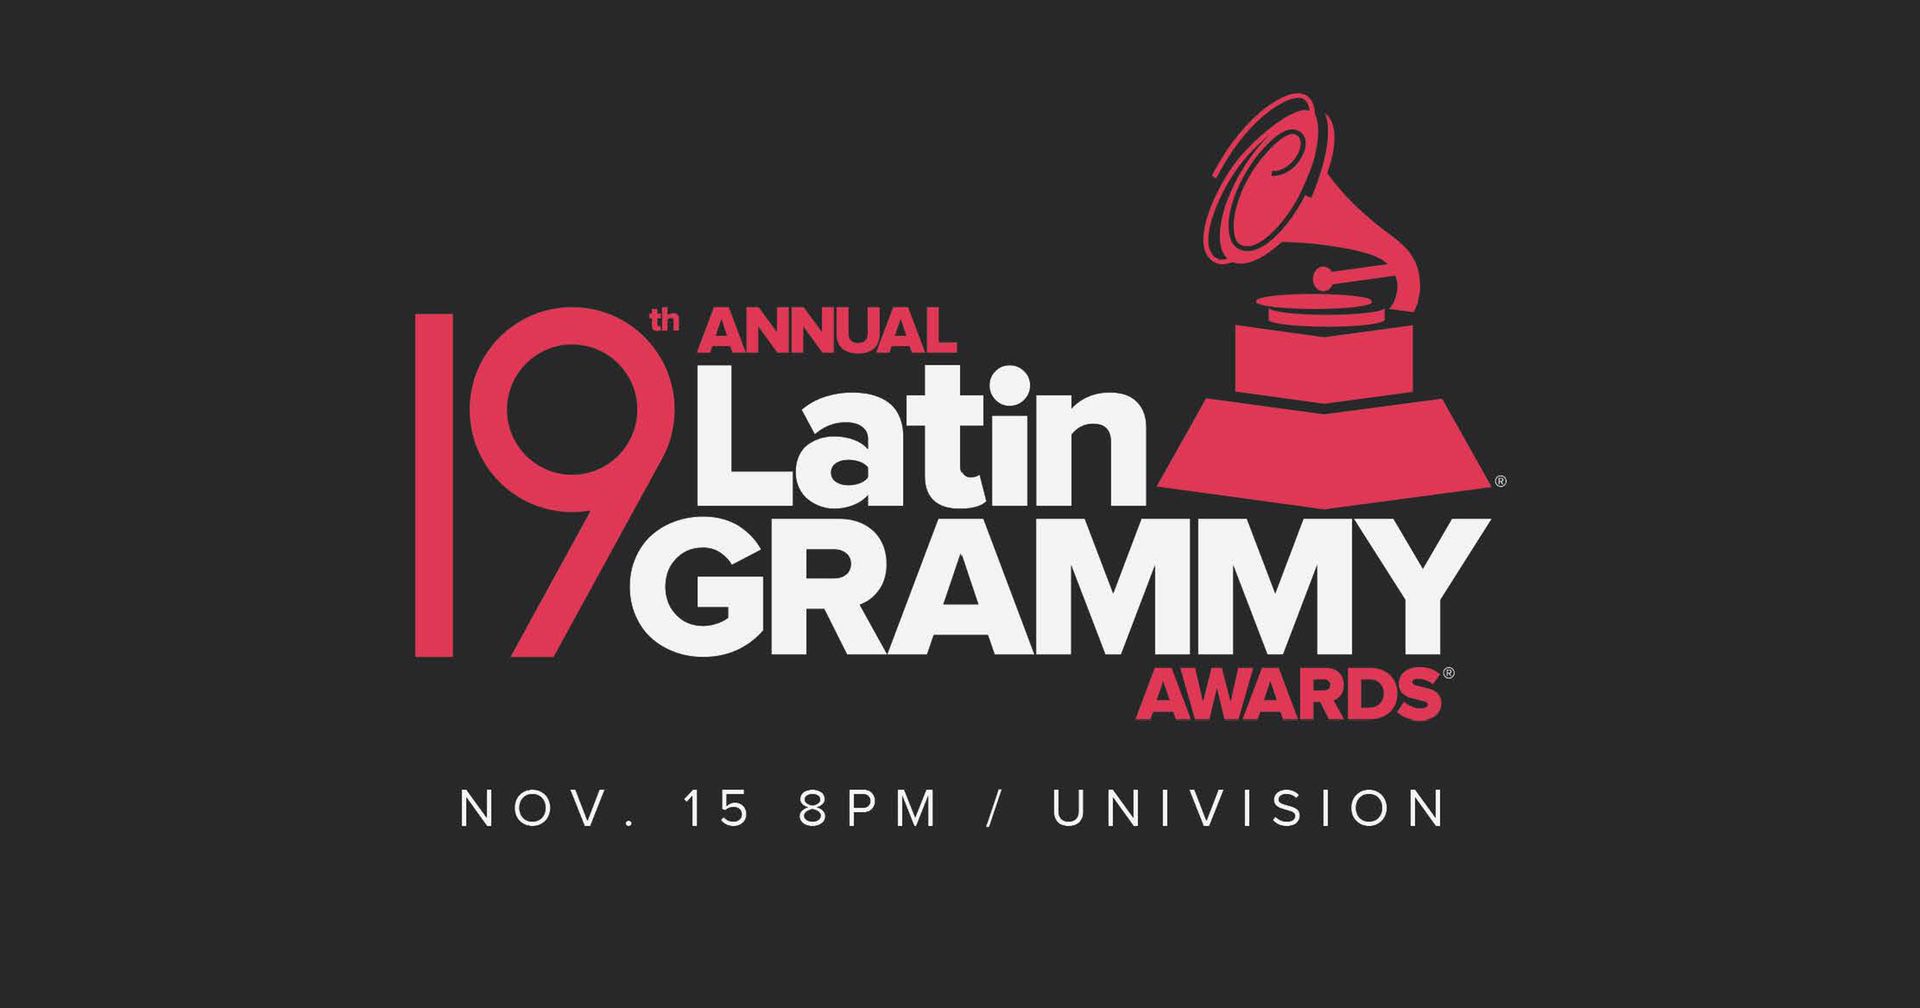 2 tickets to the Latin Grammy